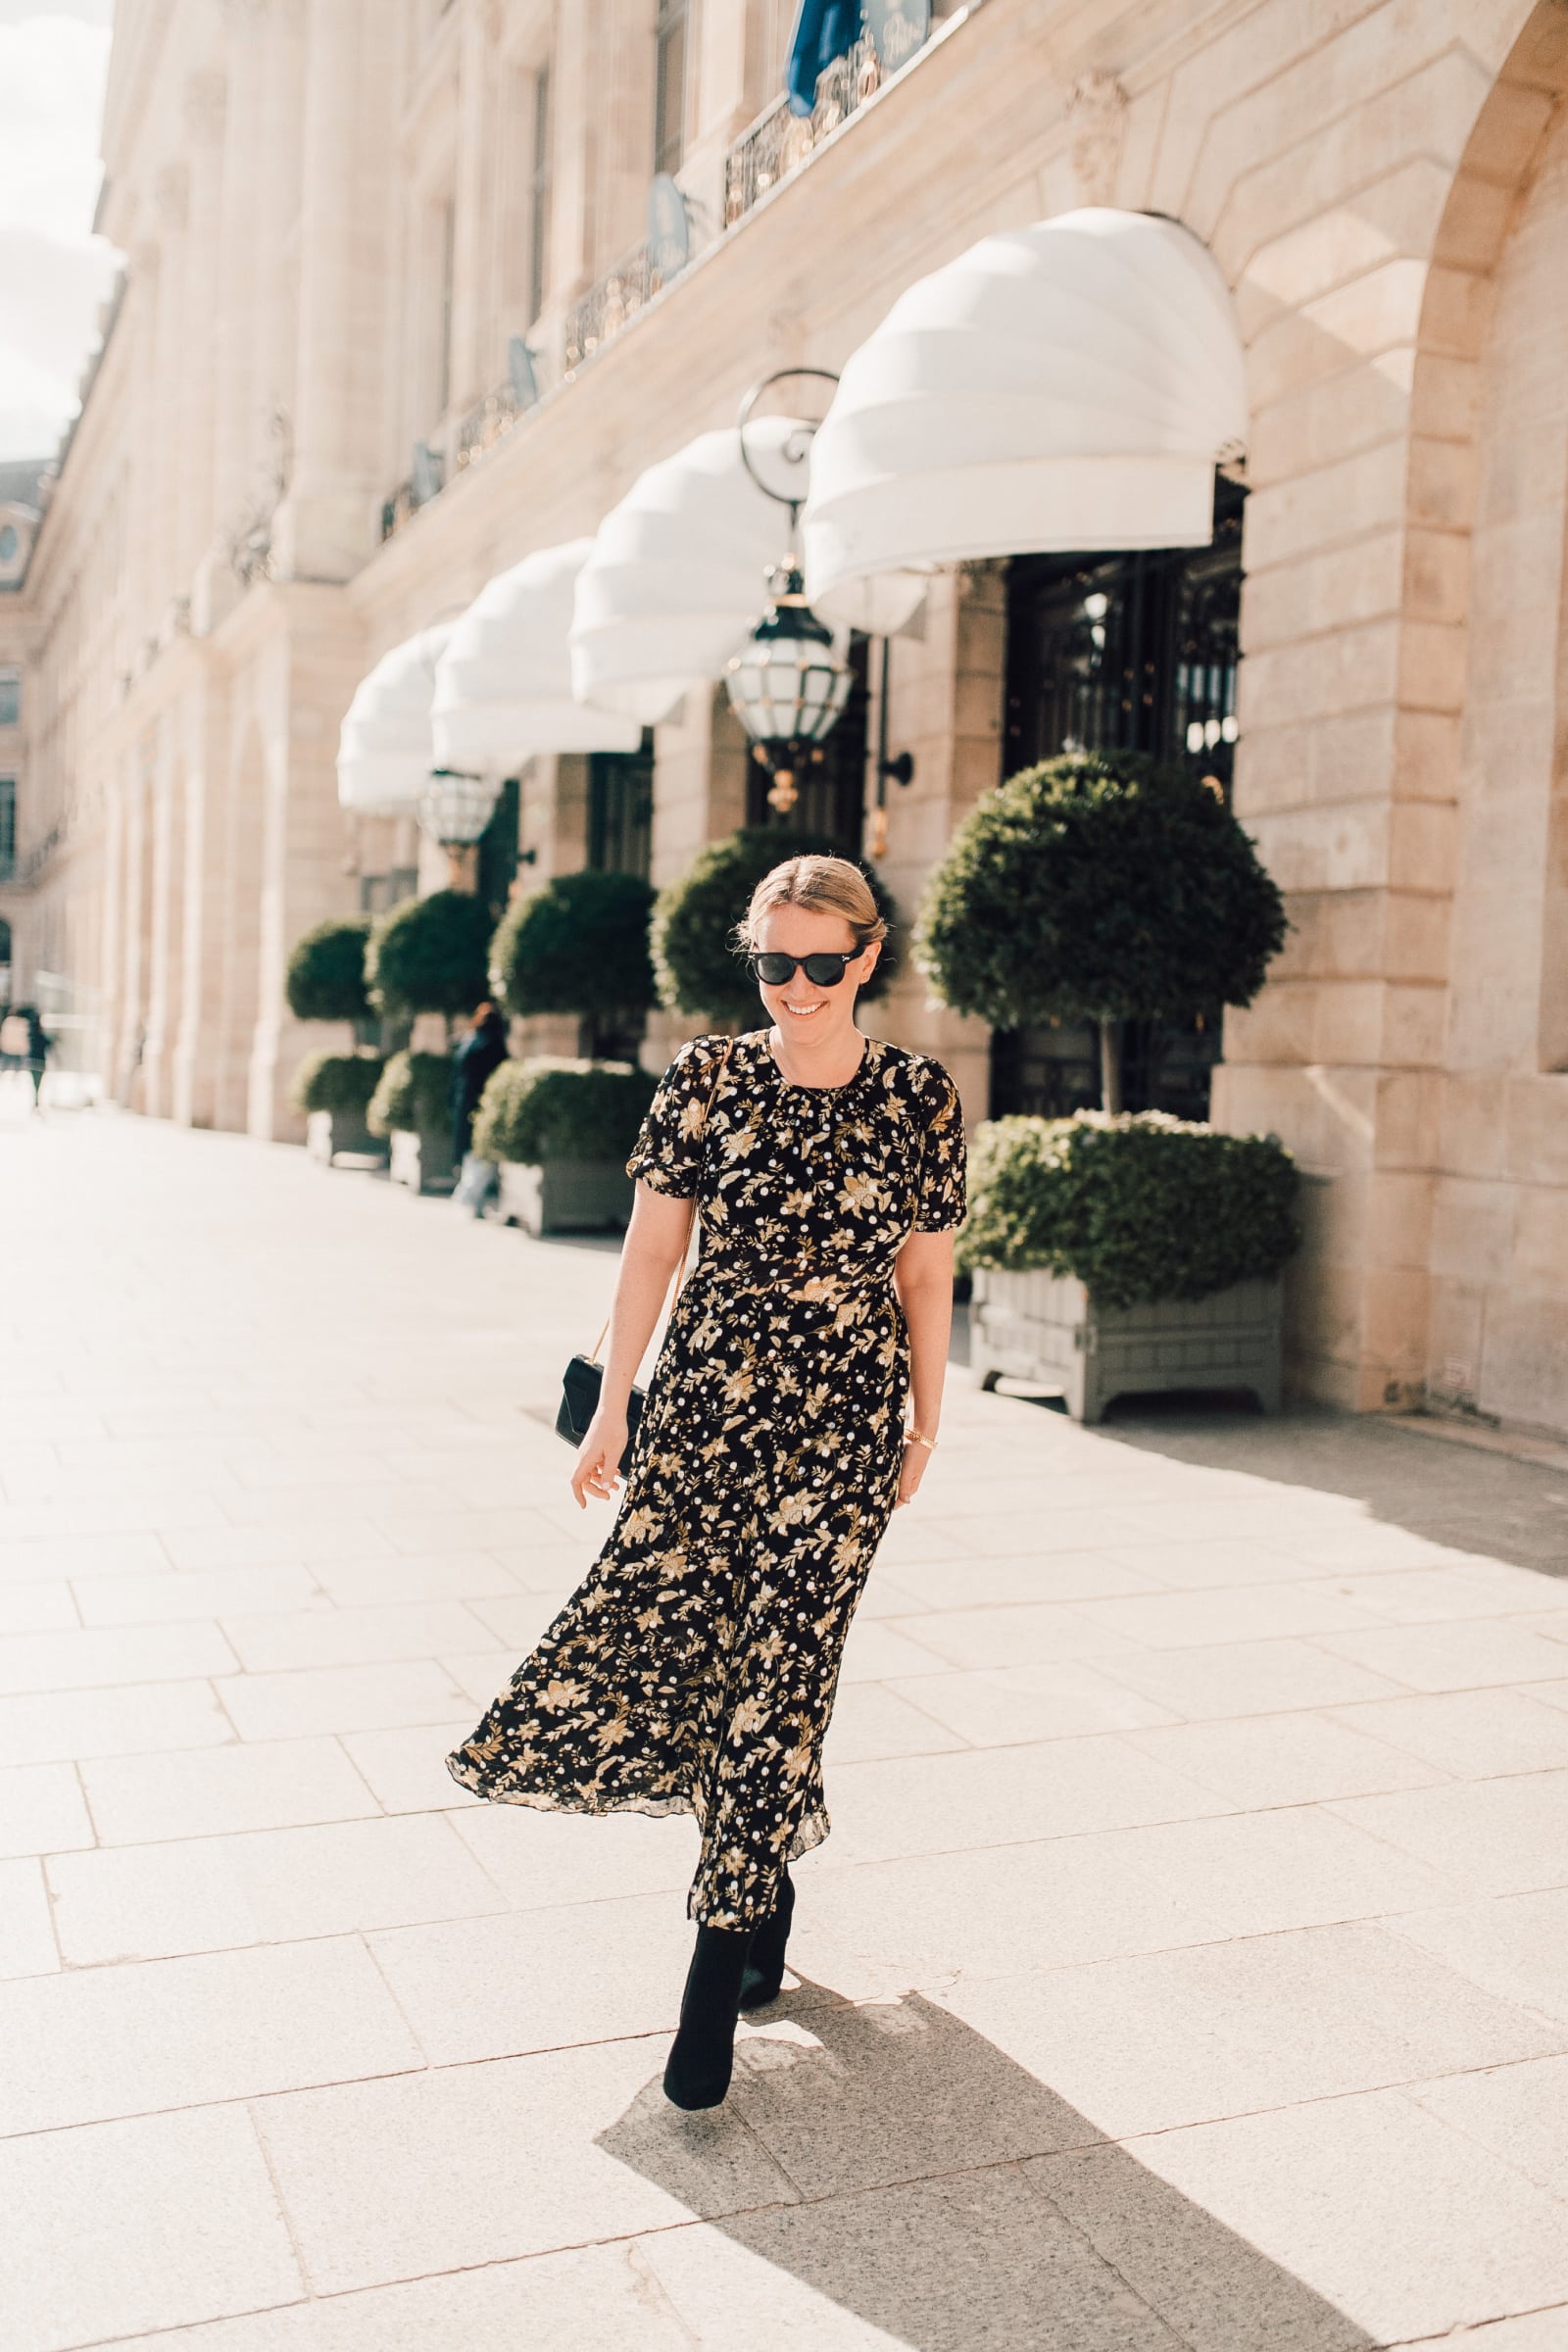 Floral Dress | What to Wear in Paris at Night